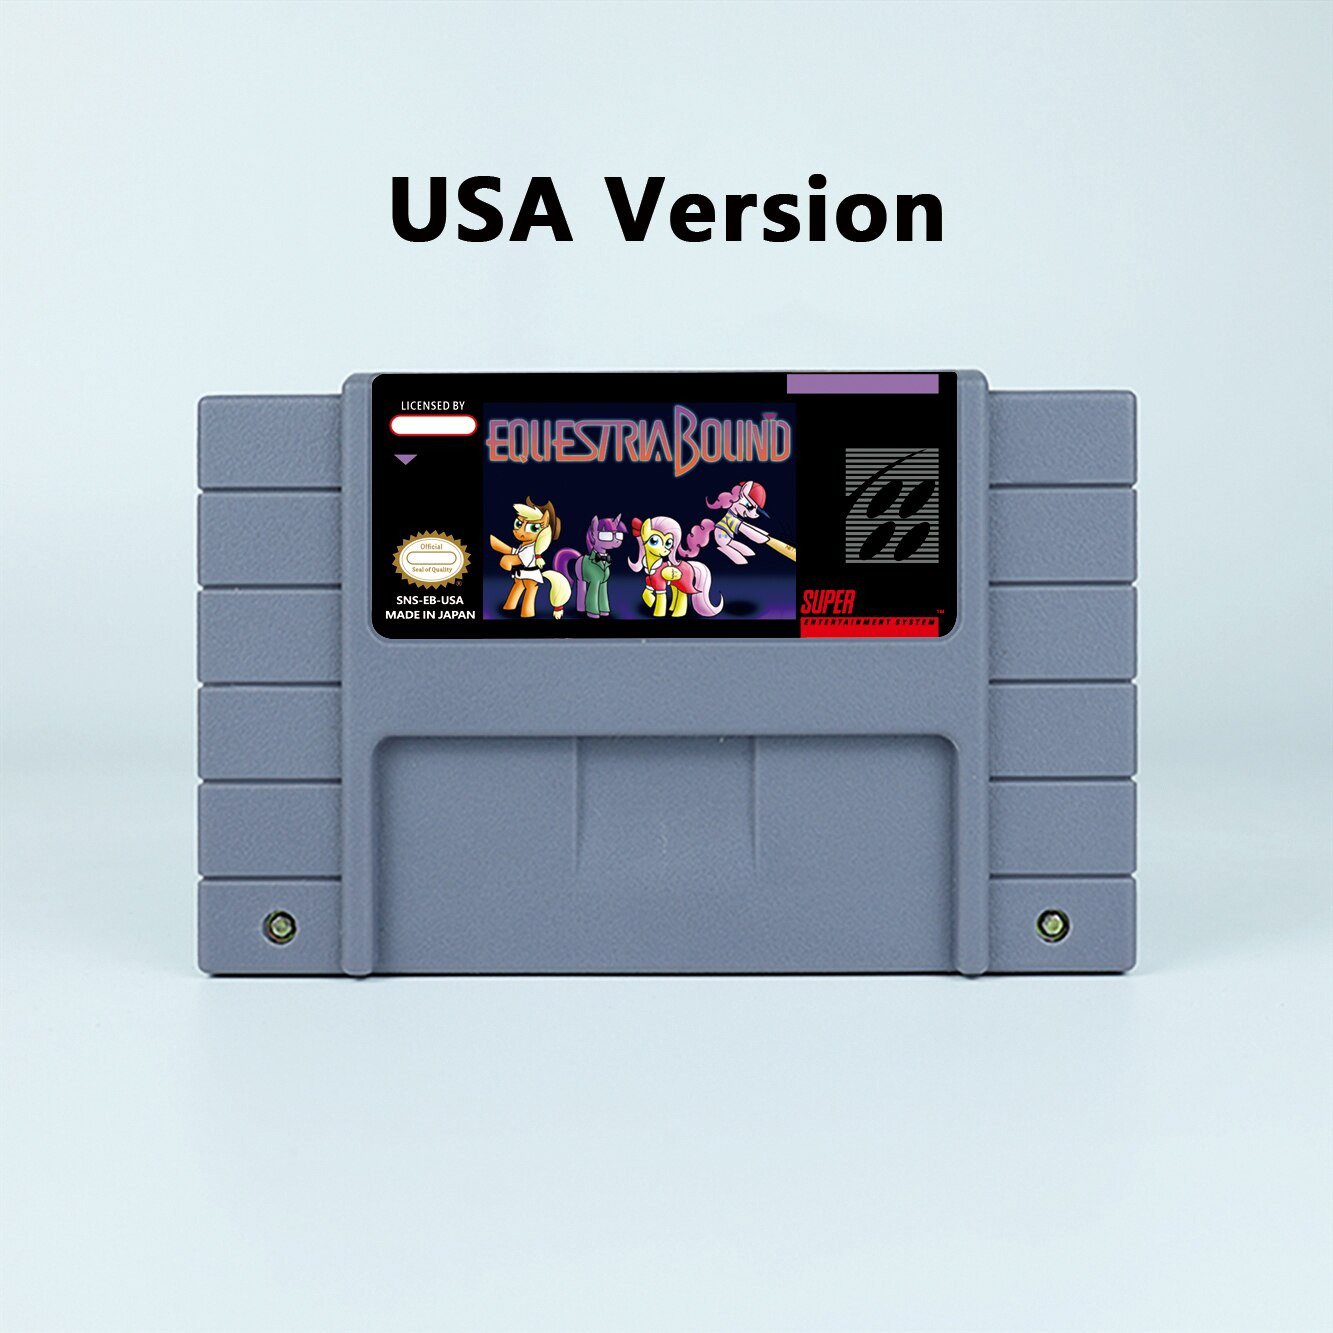 EquestriaBound RPG Game USA Version Cartridge for SNES Game Consoles